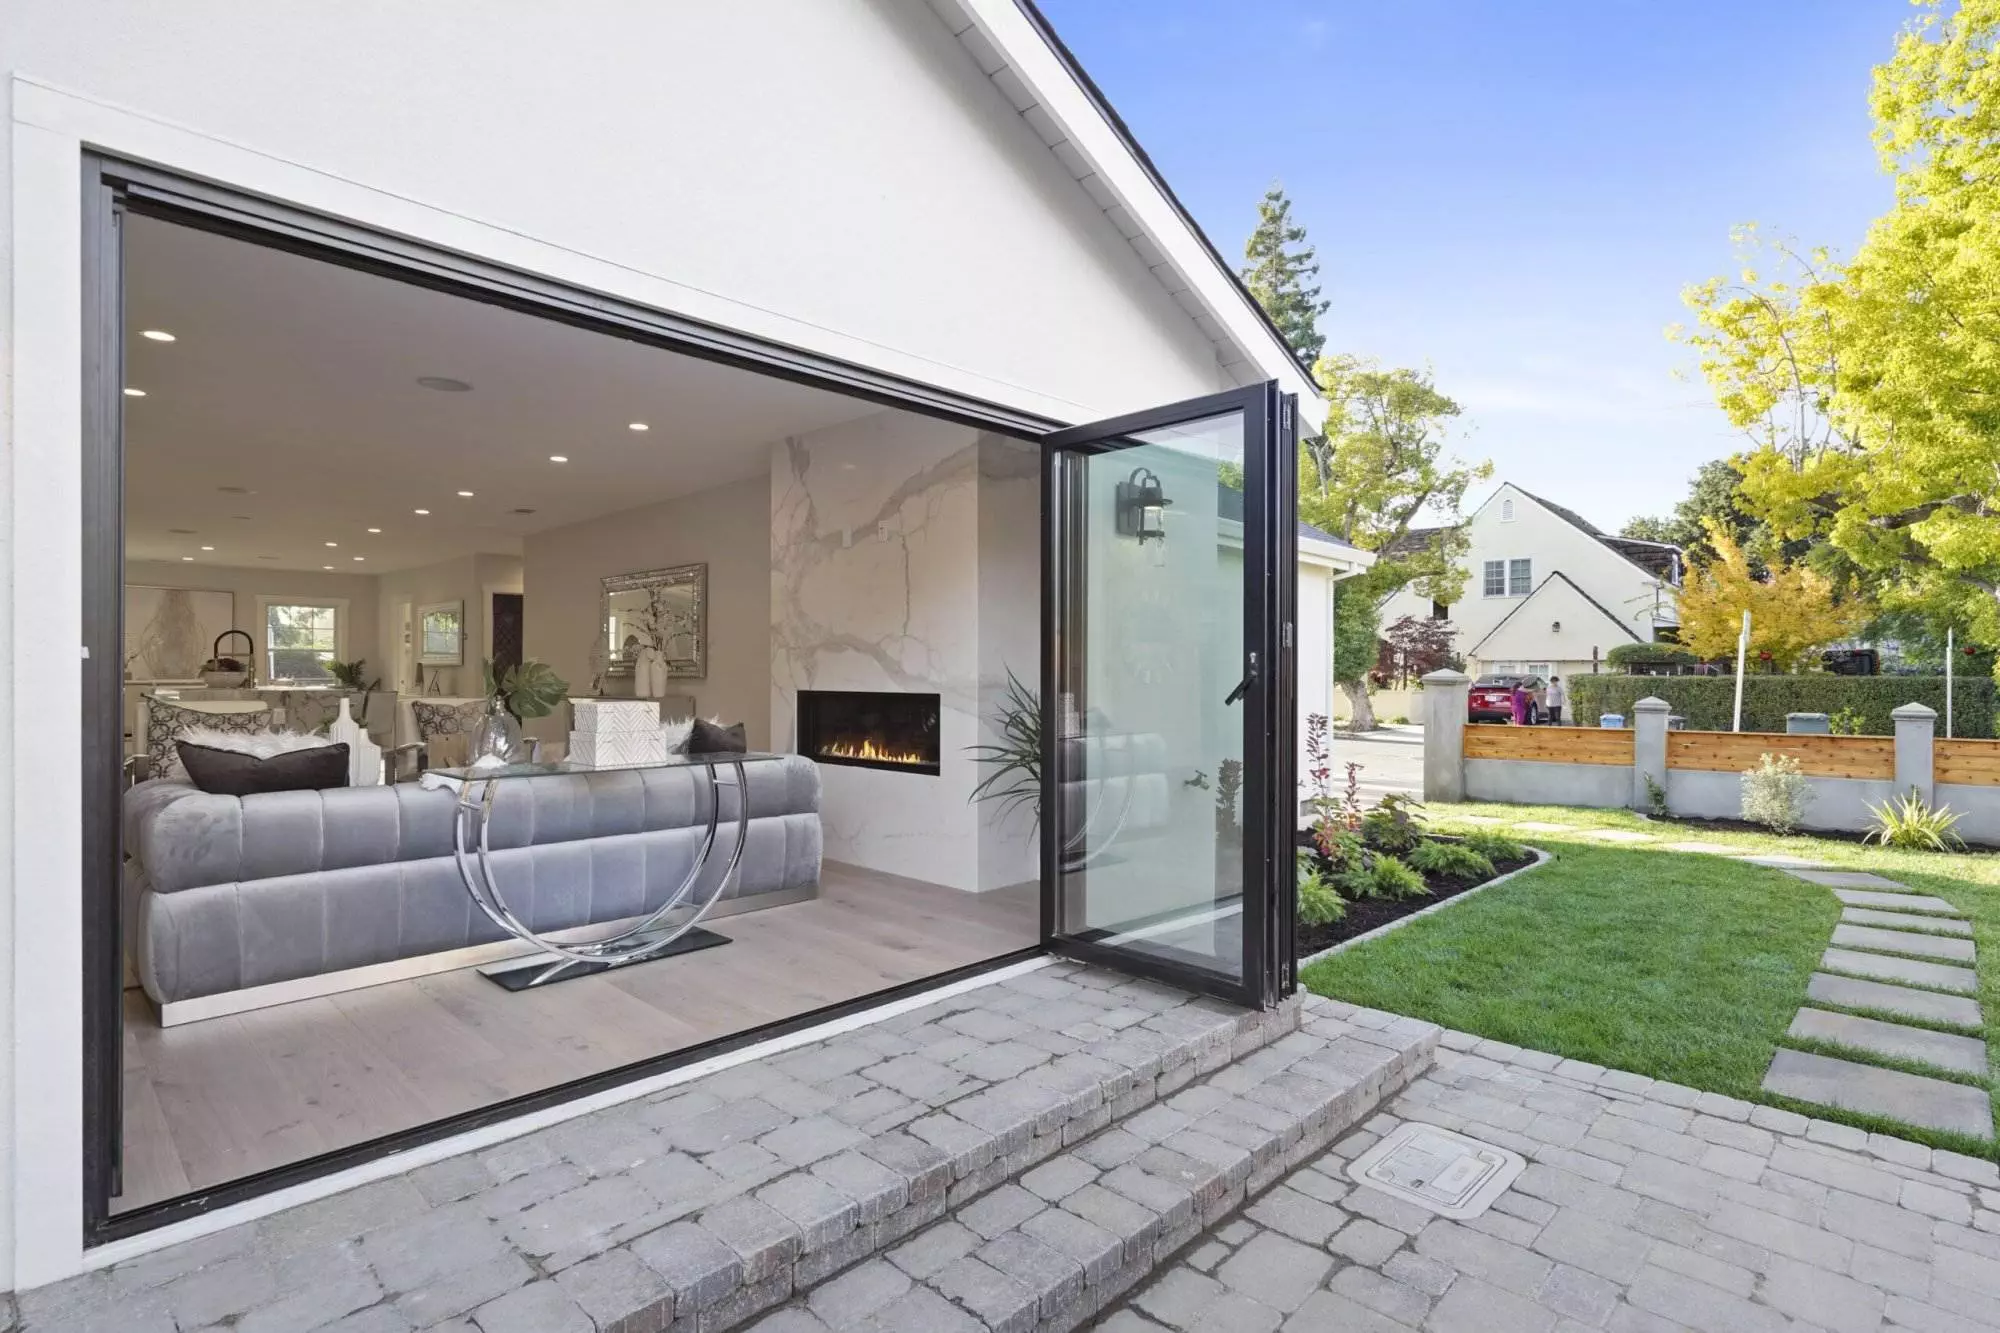 Modern living room visible through large open sliding glass door, featured in a post-construction portfolio, with gray sofas, marble fireplace, and overlooking a landscaped garden.